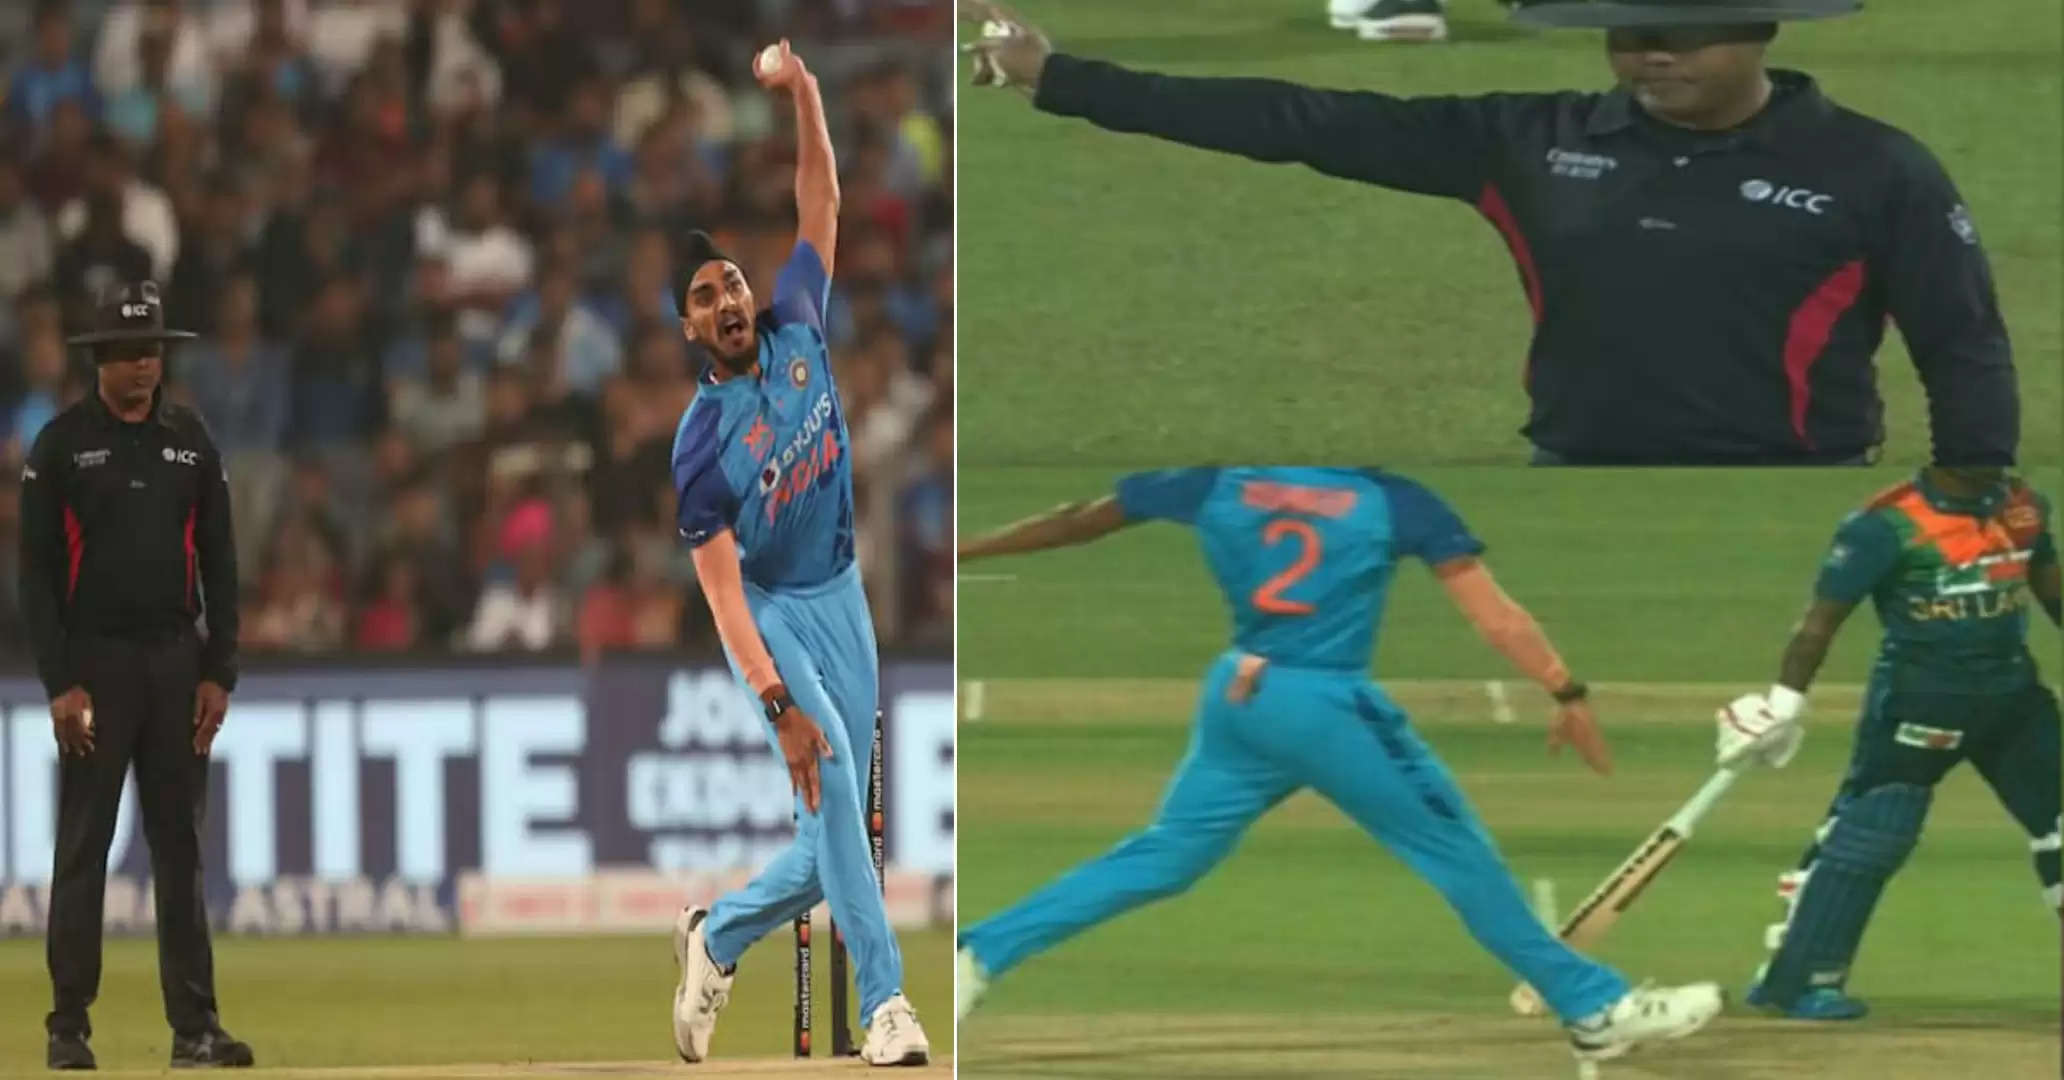 Arshdeep Singh Sets Unwanted Record By Bowling Five No Balls